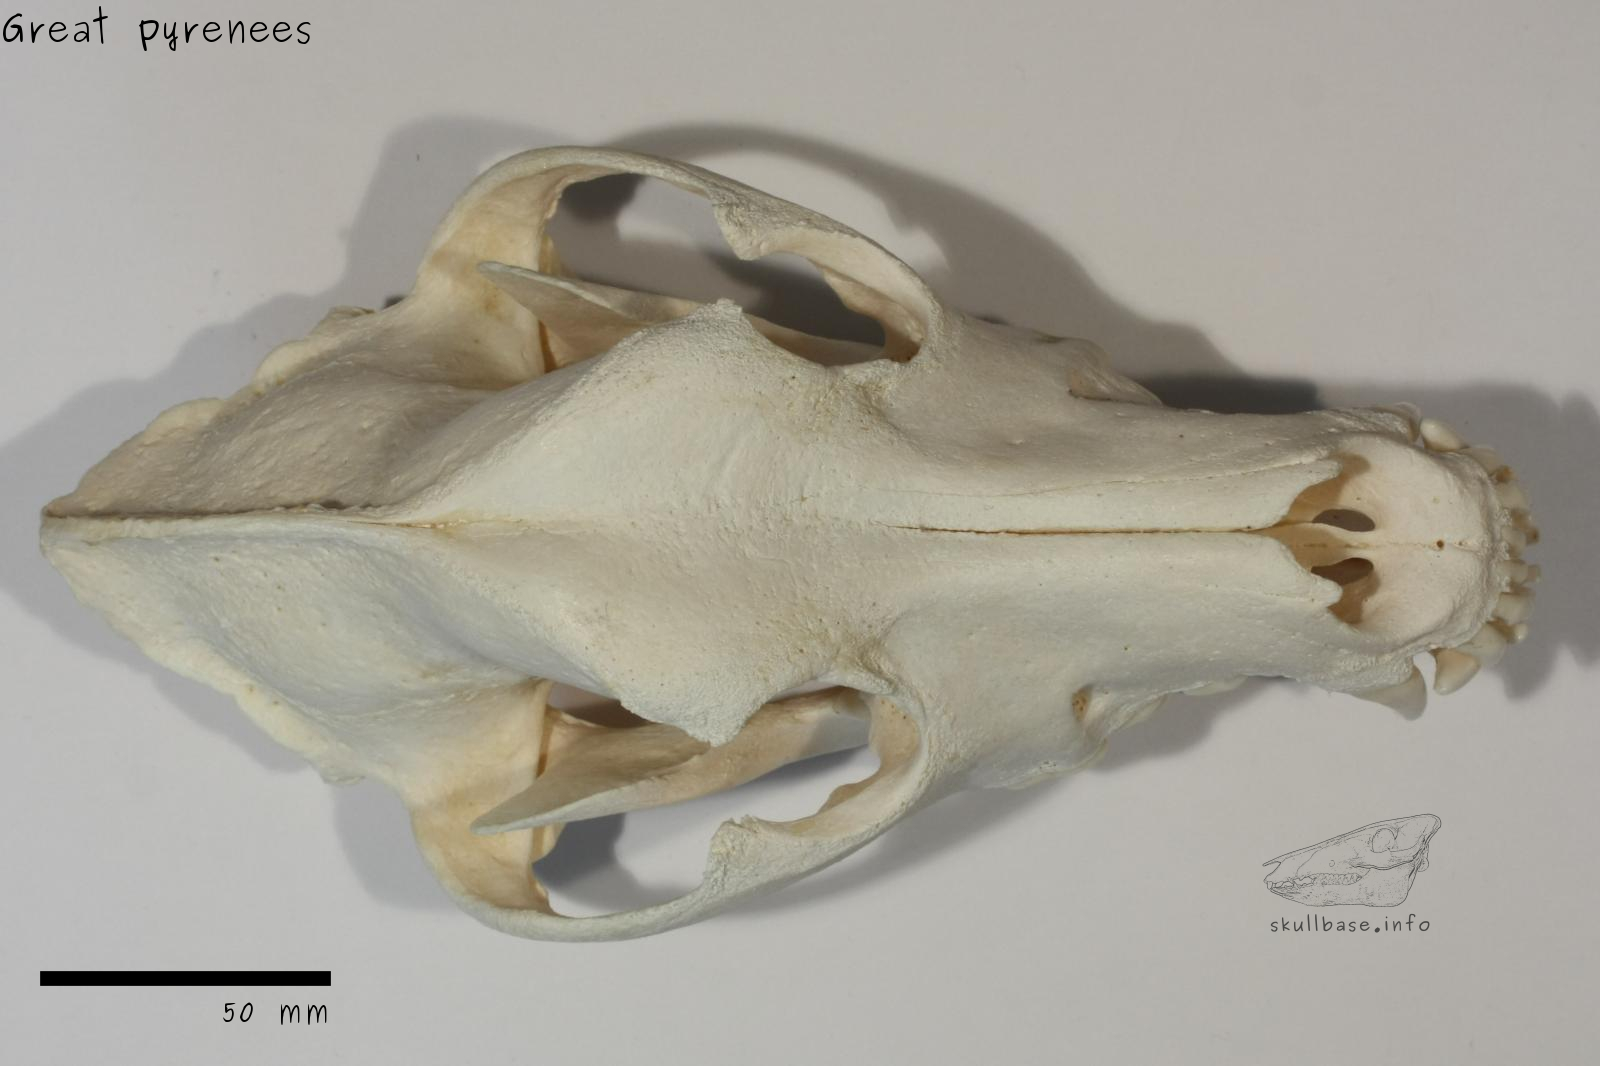 Great pyrenees (Canis lupus familiaris) skull dorsal view